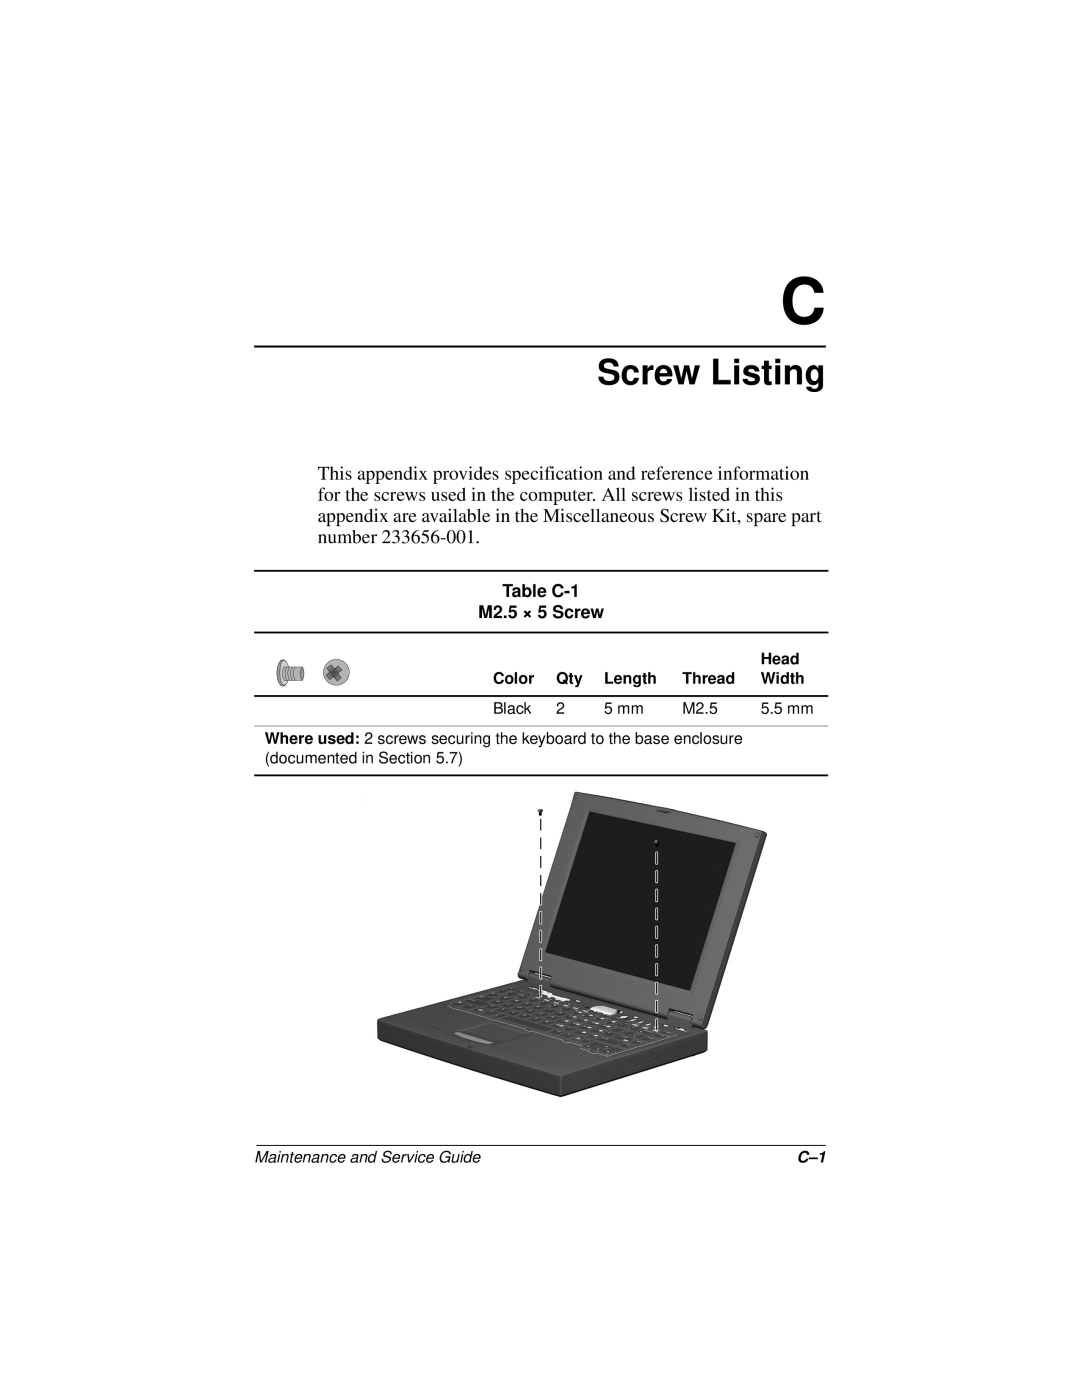 Compaq N110 manual Screw Listing, Table C-1 M2.5 × 5 Screw, Maintenance and Service Guide 